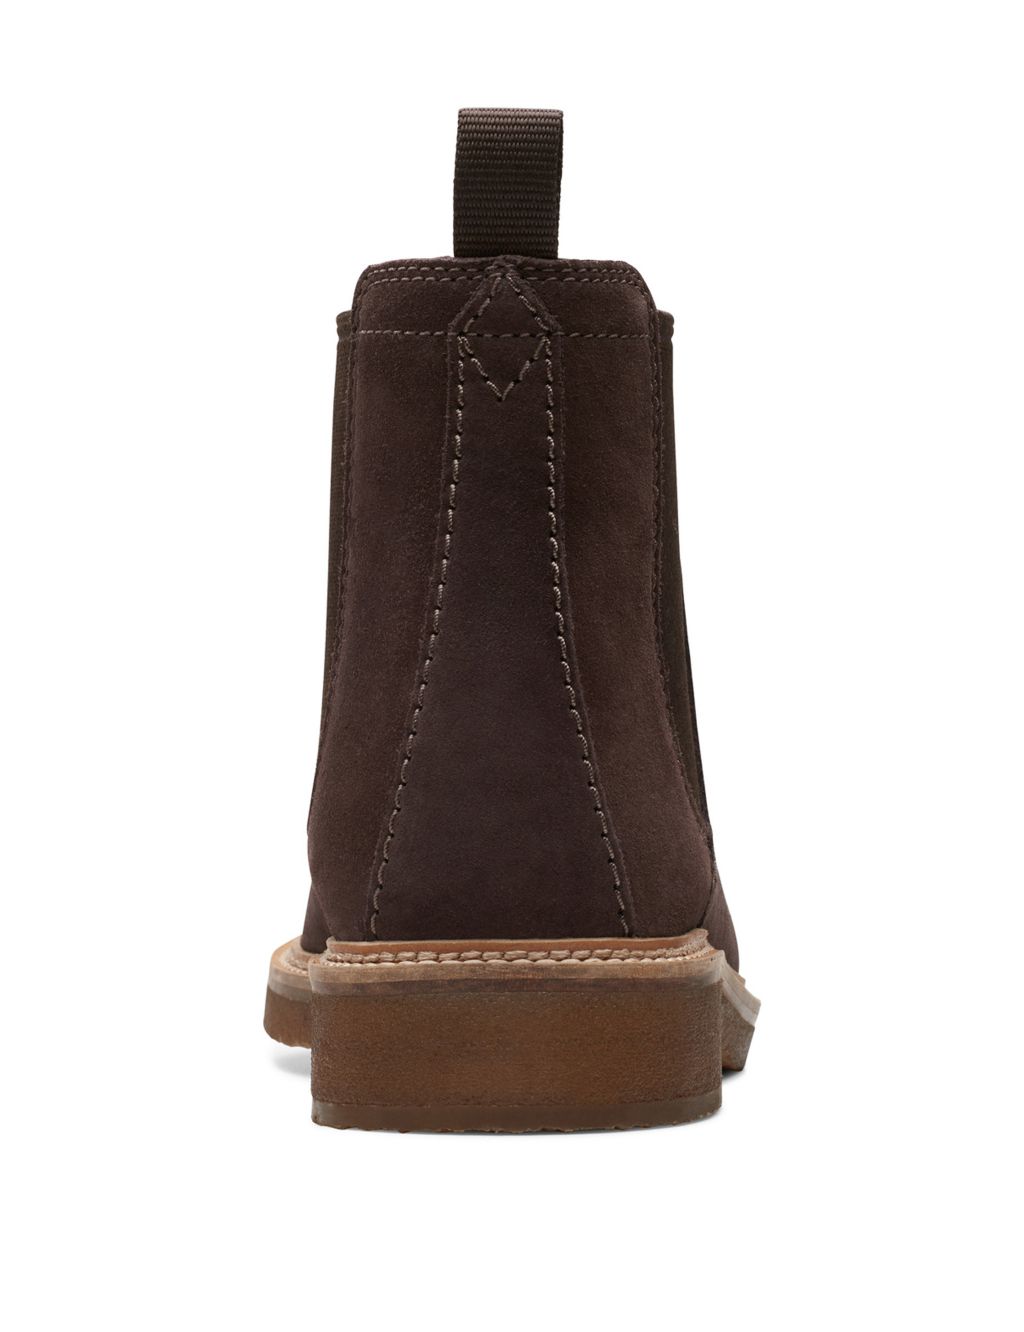 Suede Chelsea Boots image 7